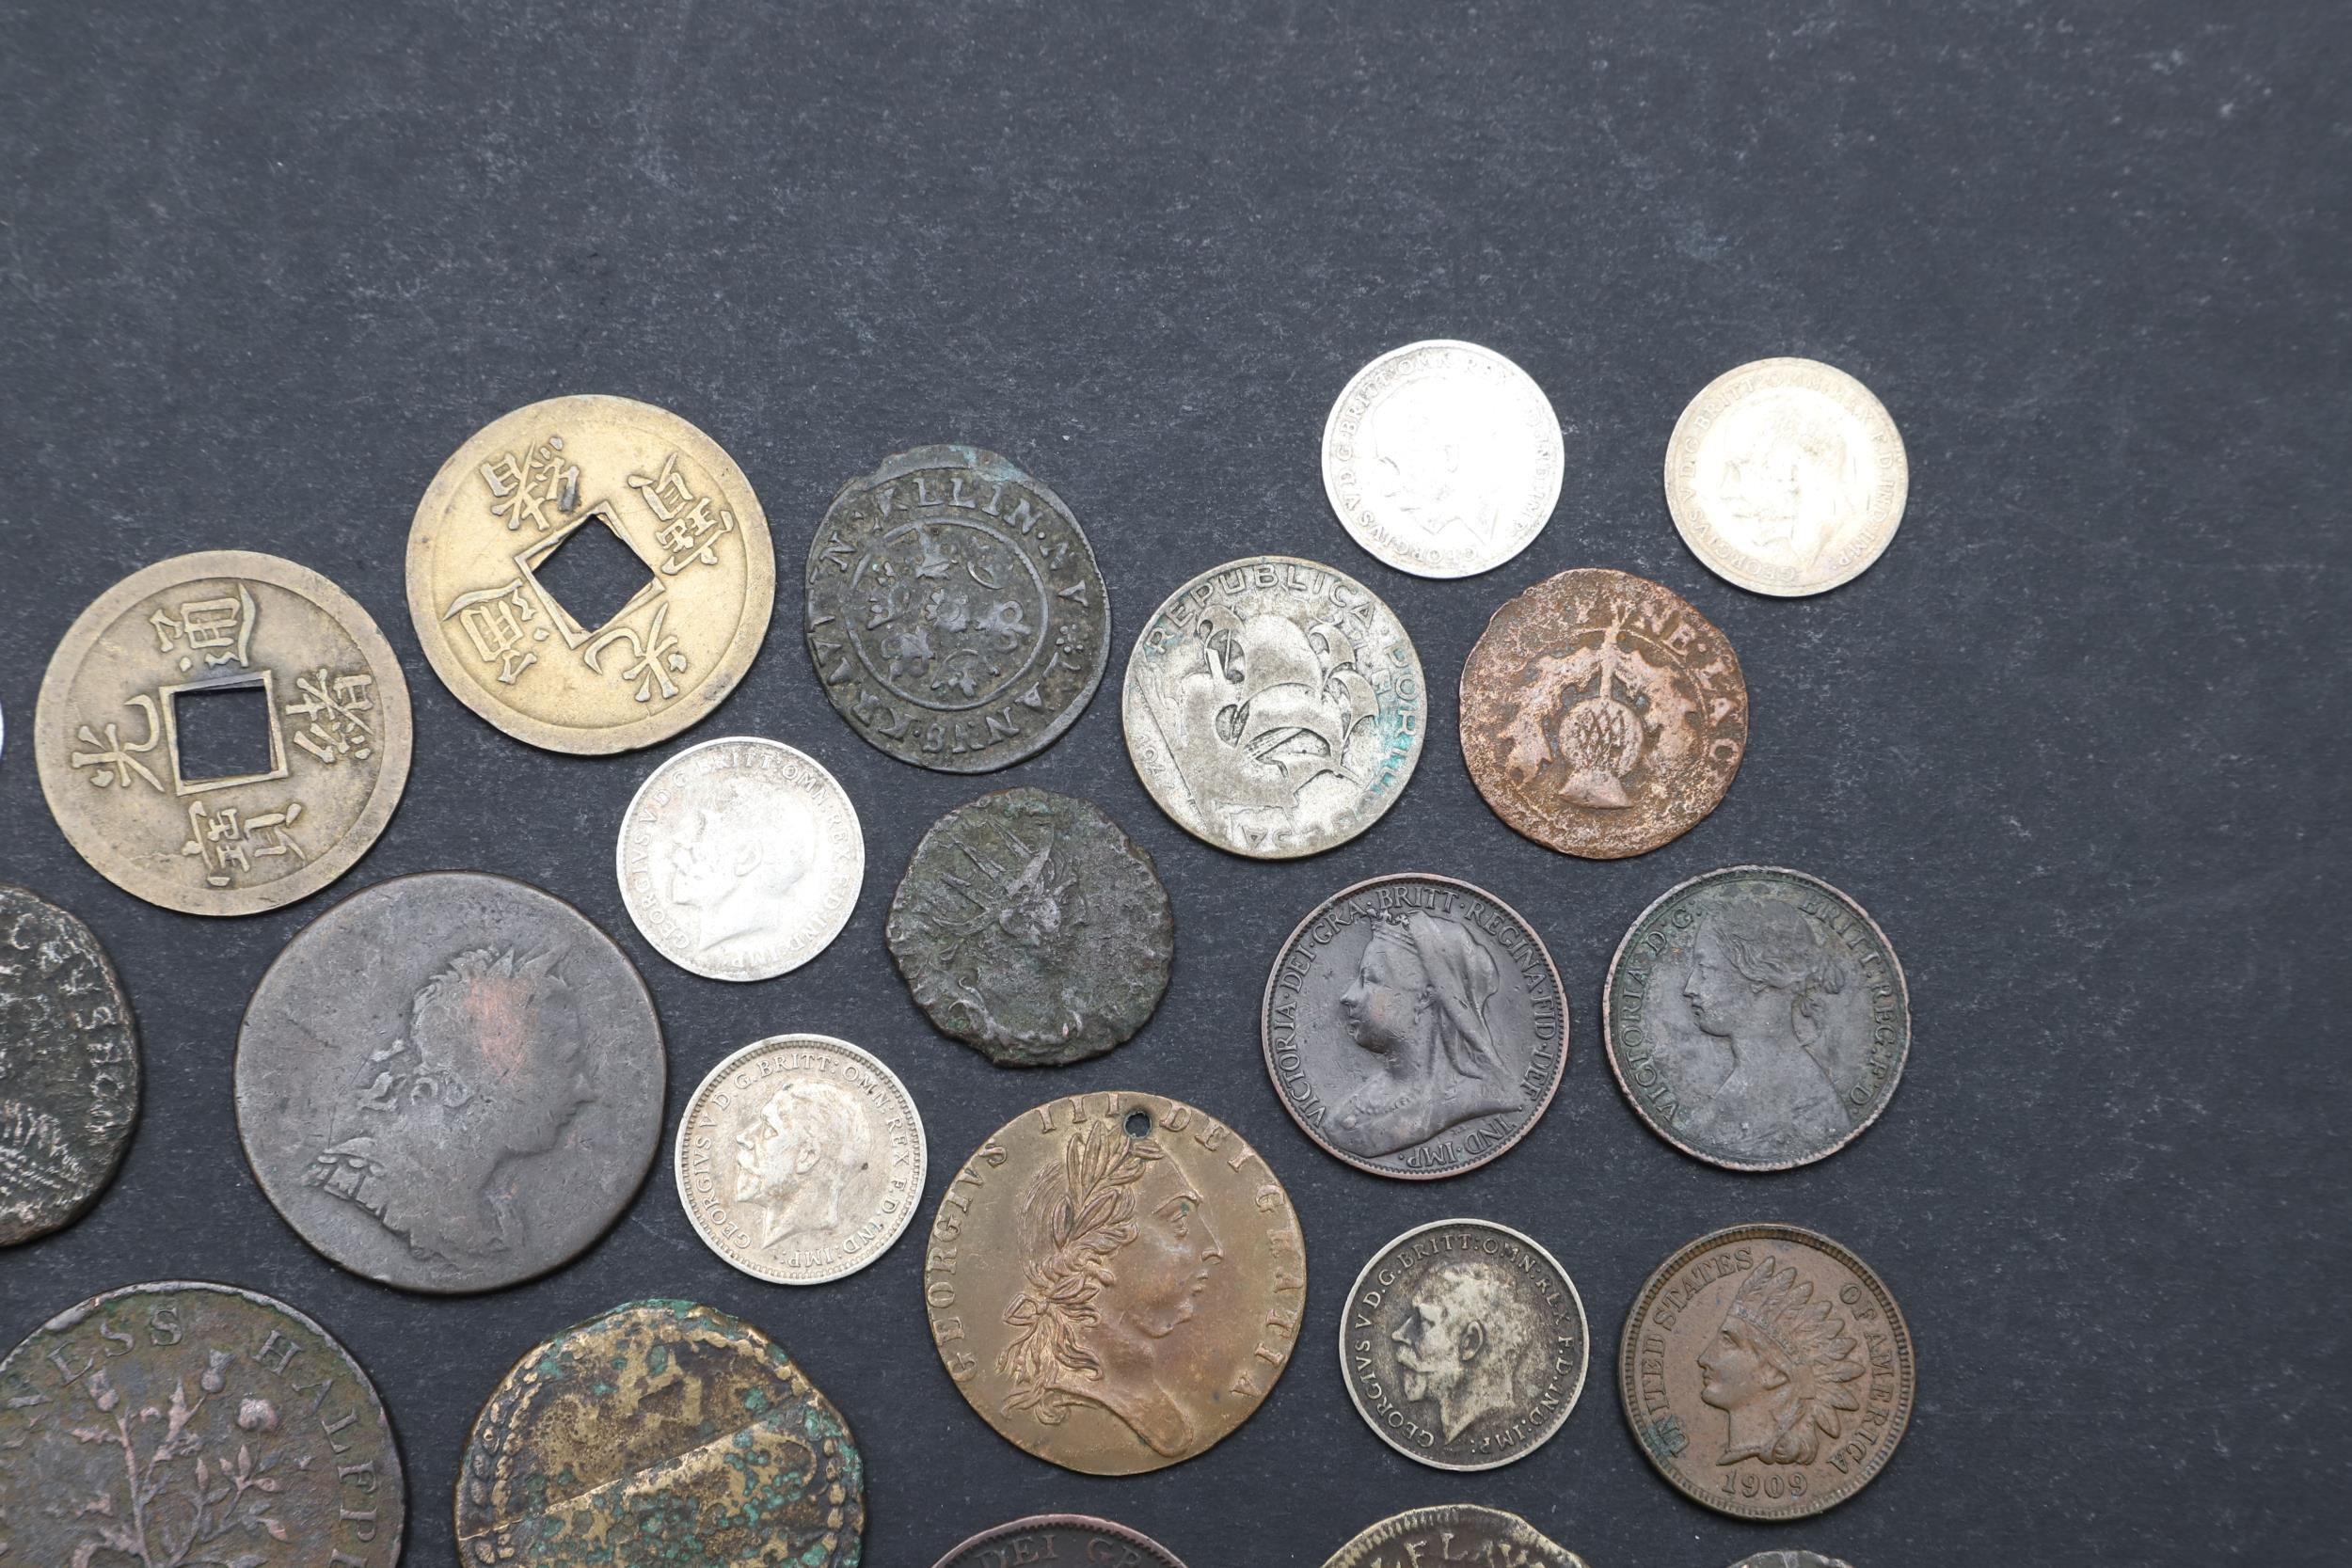 A SMALL COLLECTION OF COINS INCLUDING ROMAN, JETONS AND OTHERS. - Image 5 of 6